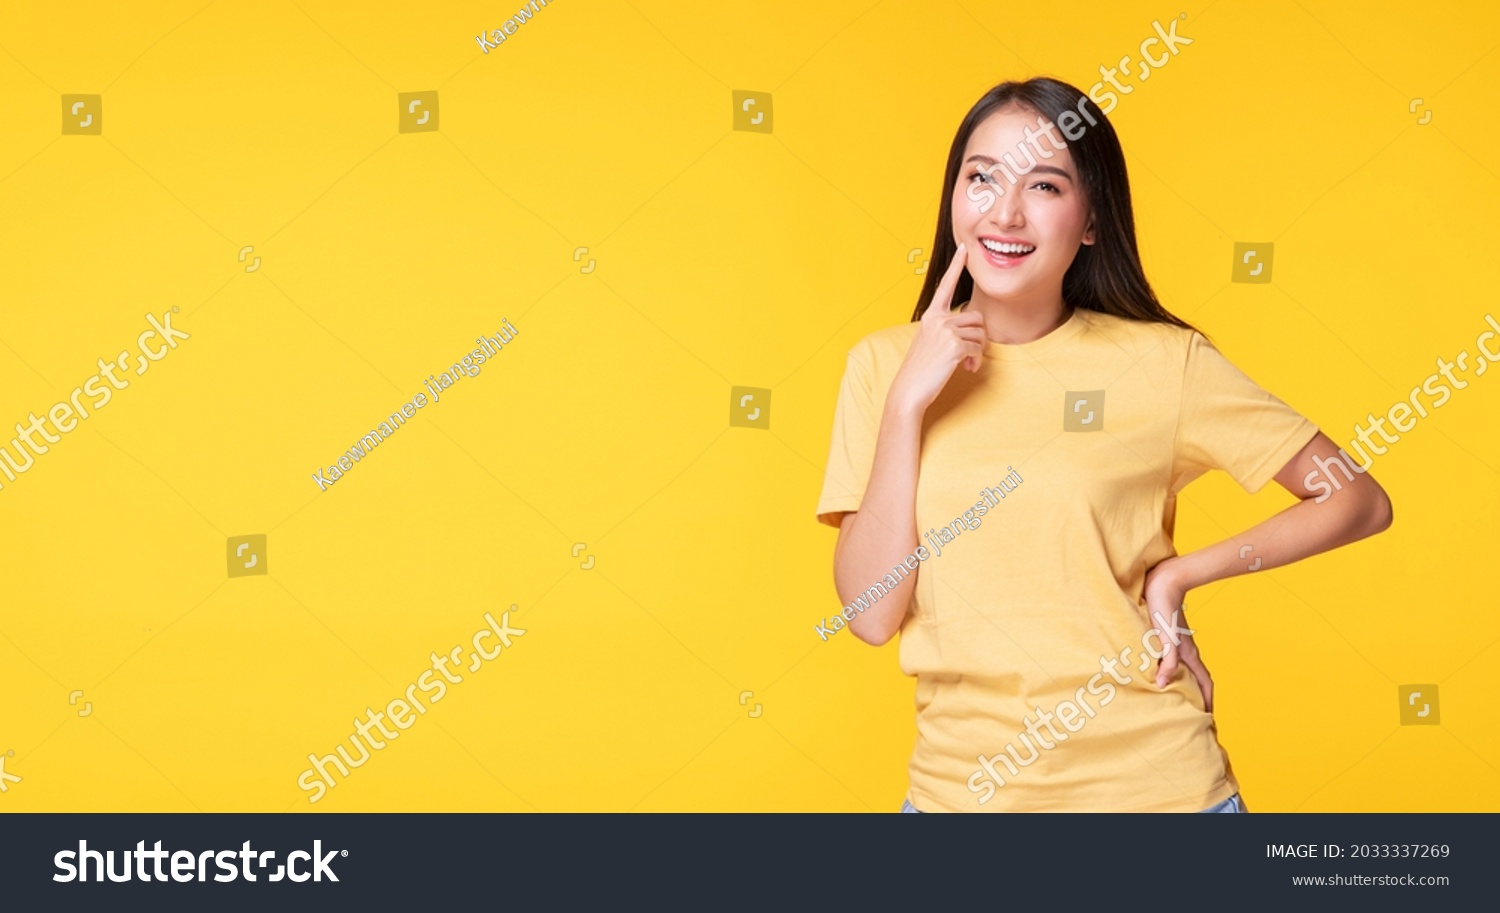 Cheerful Asian Model Woman Use Finger Stock Photo Shutterstock